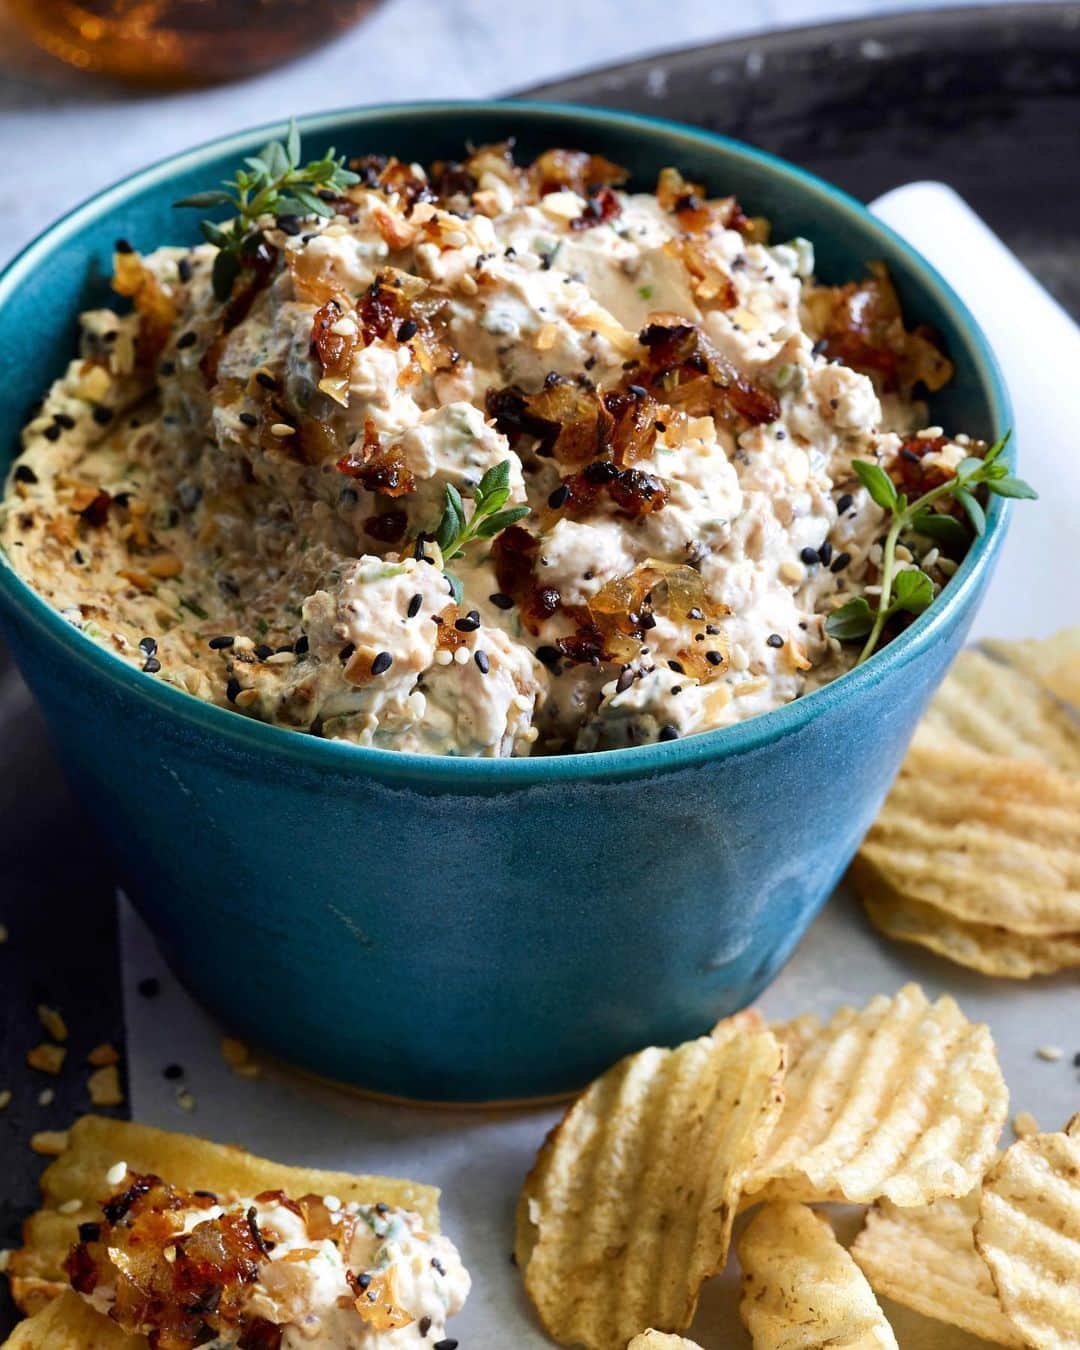 Gaby Dalkinのインスタグラム：「Will I be throwing a party - no. Will I watch the game - probs not. Will I watch every commercial - you betcha! And I’ll absolutely be eating all the food come game day this weekend! There are 24 of my fav game day recipes including this onion dip up on the blog + linked in my profile!! https://whatsgabycooking.com/24-game-day-recipes/」